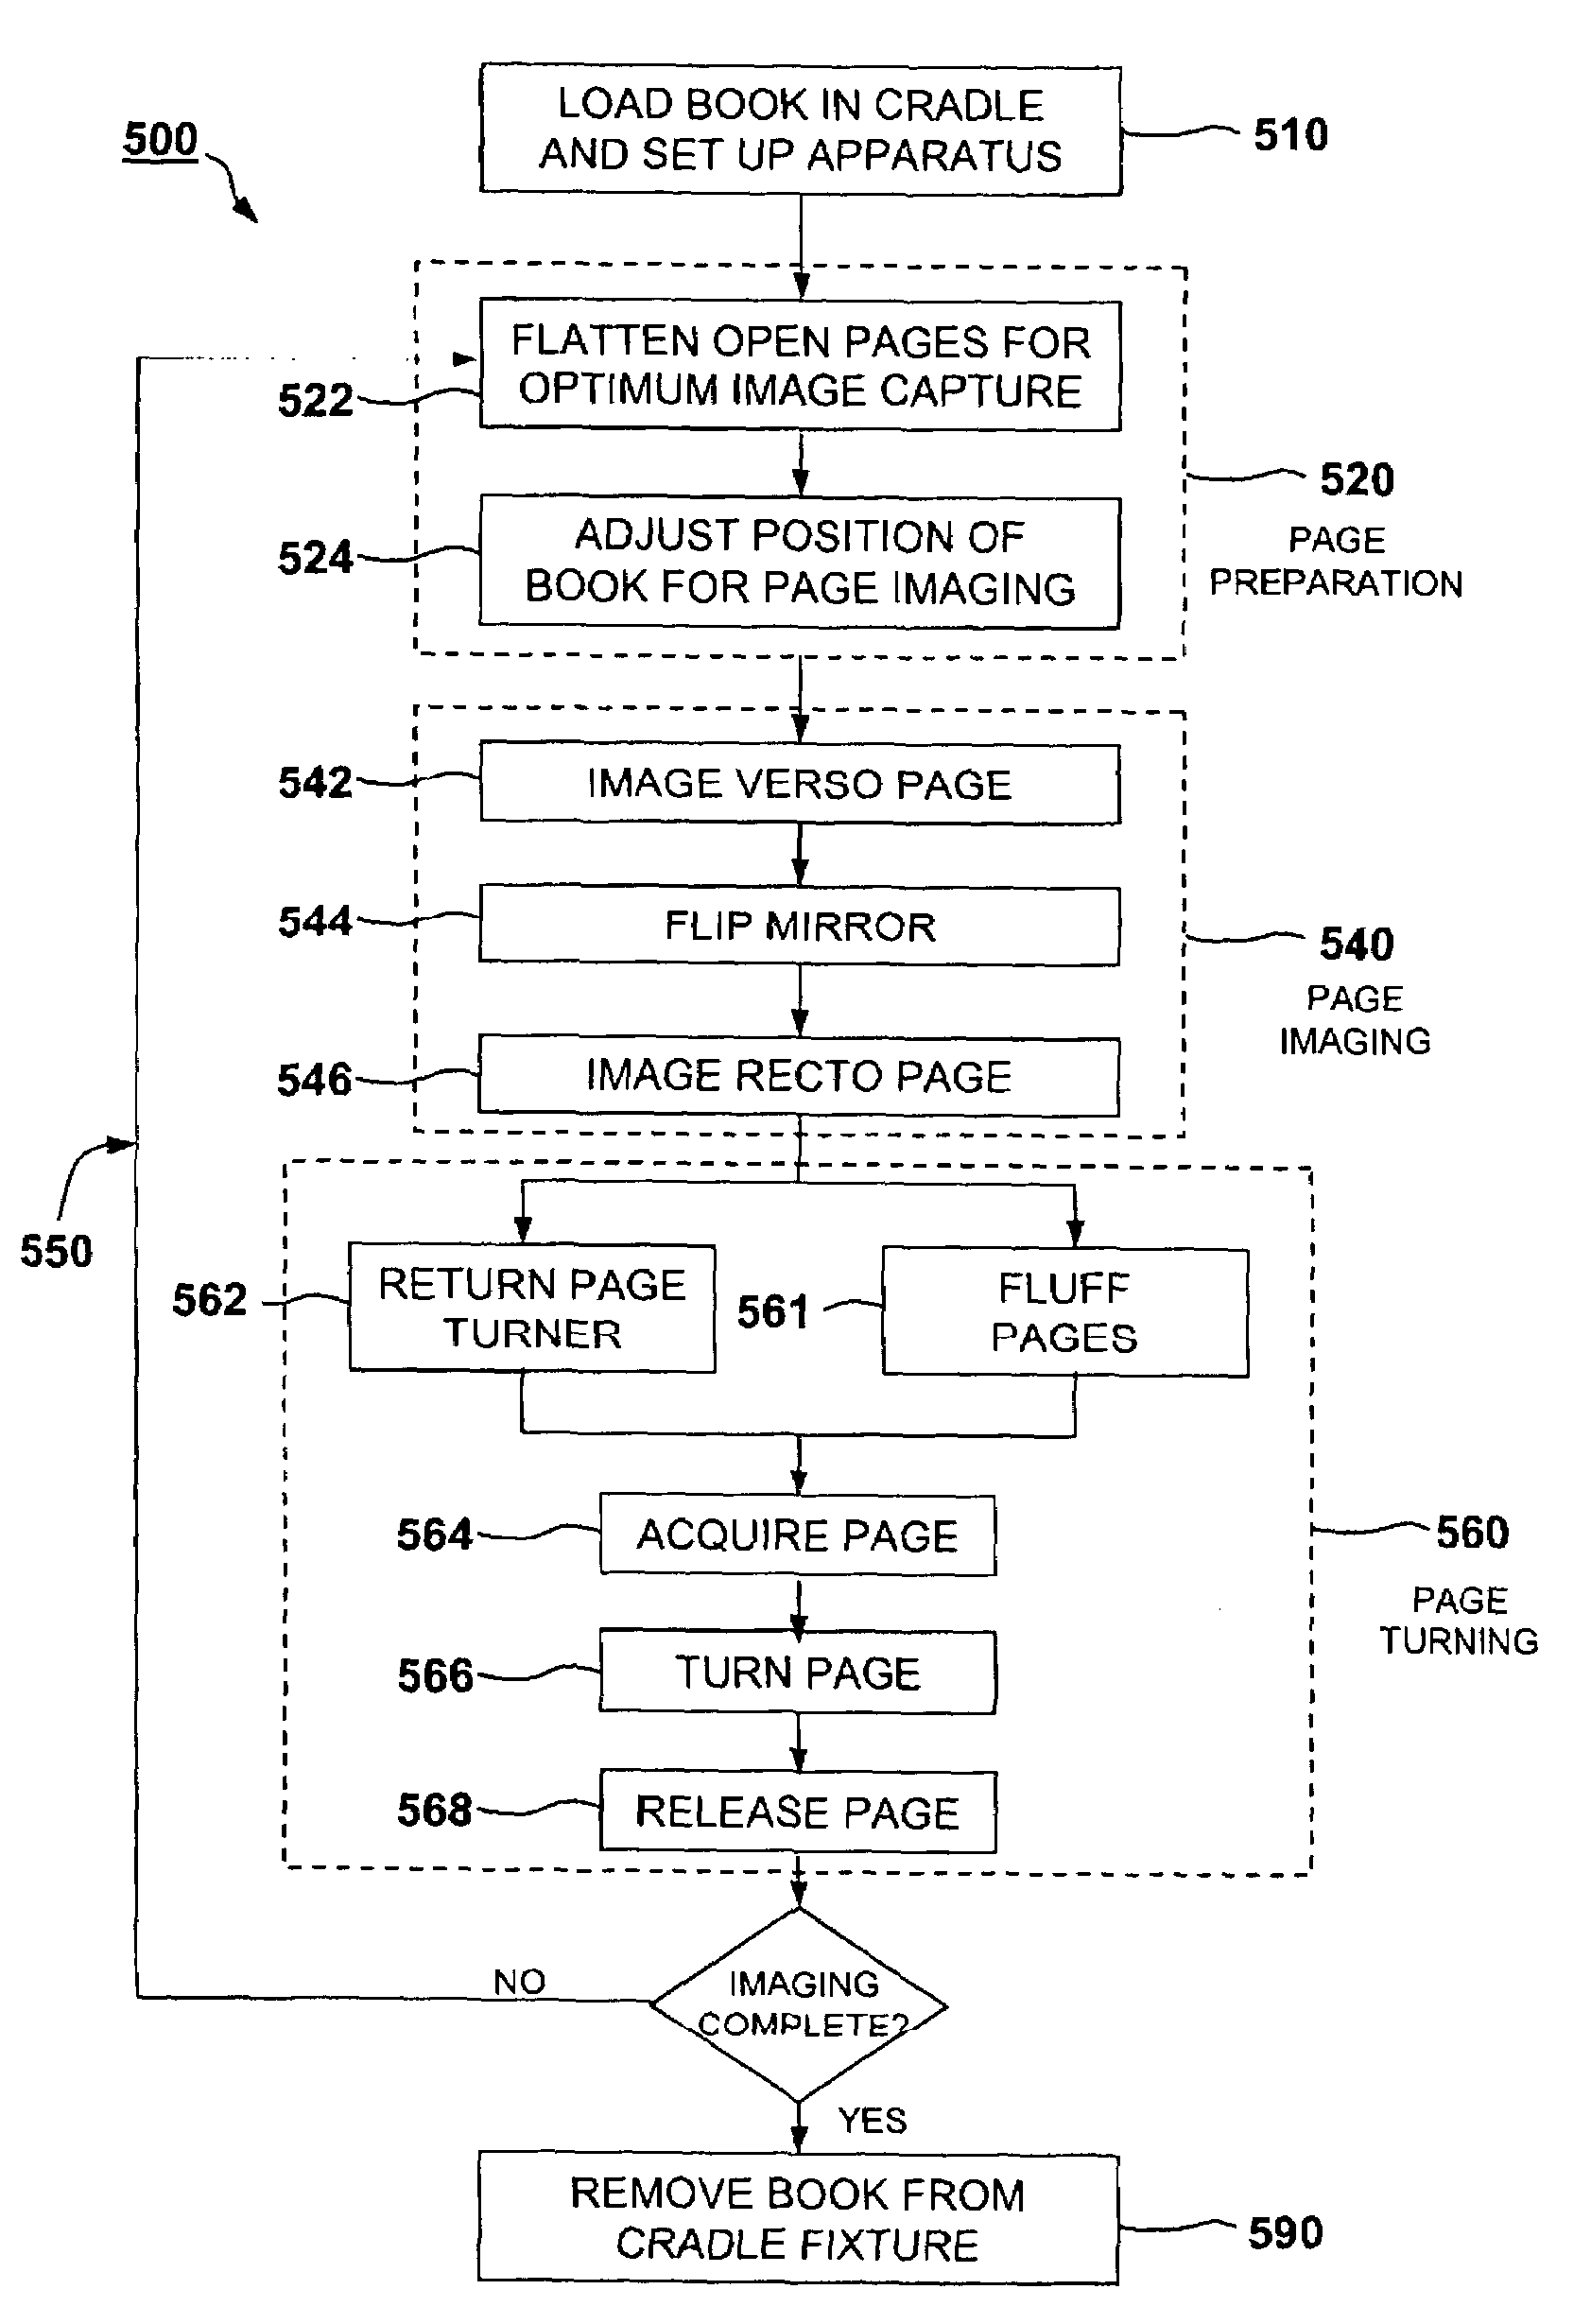 Automated page turning apparatus to assist in viewing pages of a document